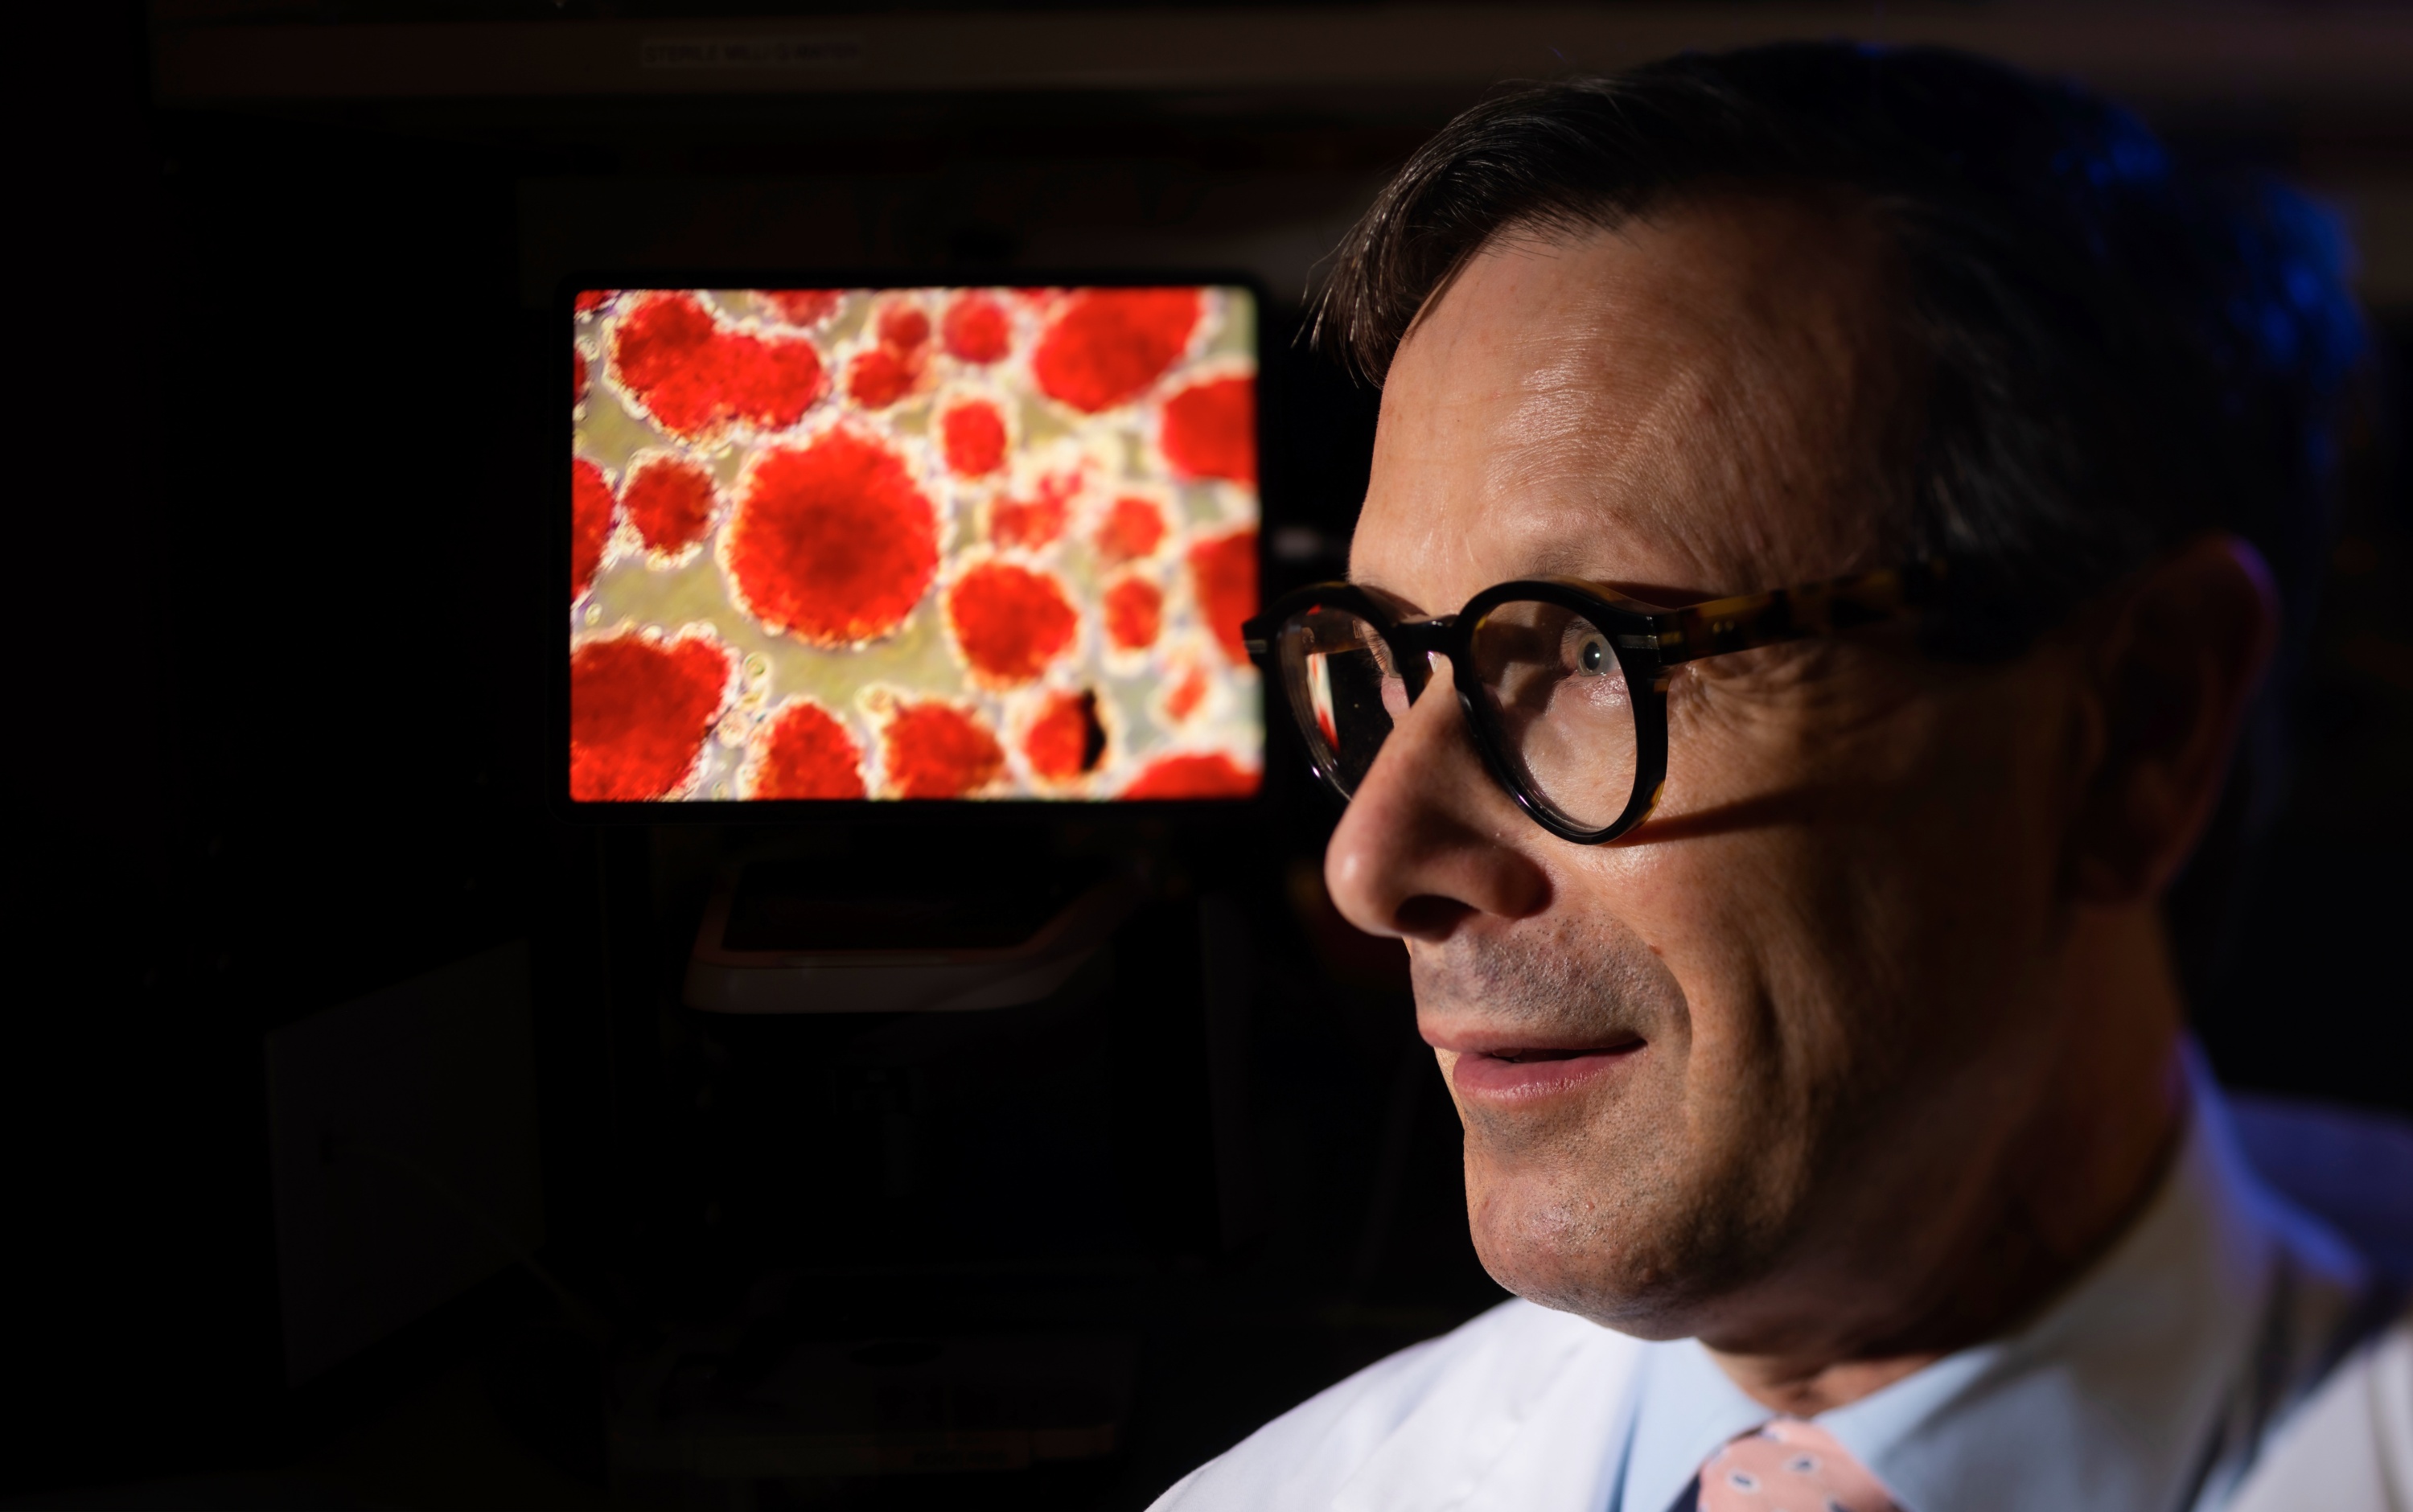 James Shapiro is pictured with a computer monitor displaying islet cells. (Photo: John Ulan)